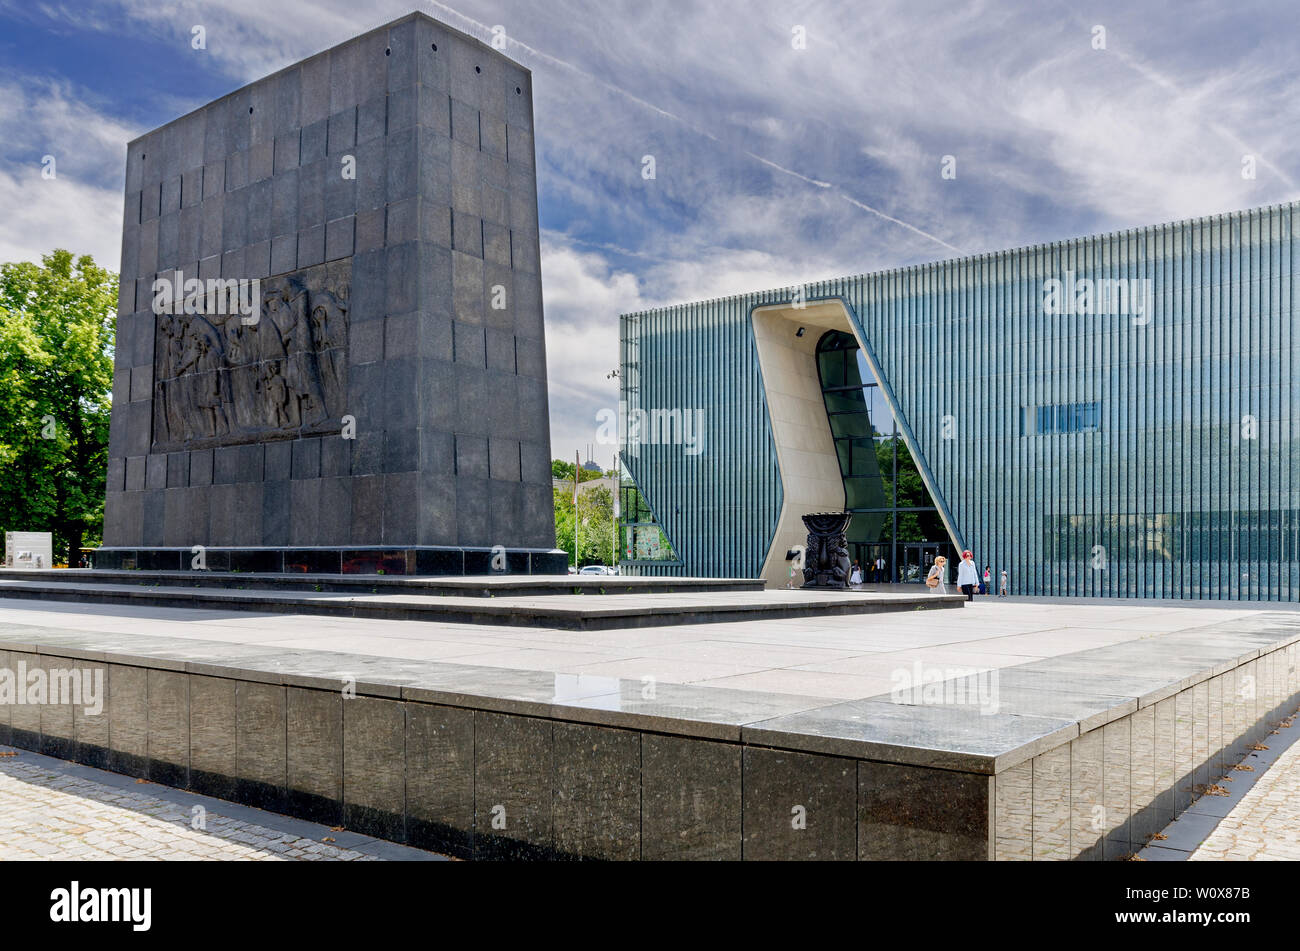 Ghetto Heroes Monument. Warsaw Ghetto Uprising memorial. Museum of the History of Polish Jews 'Polin'. Warsaw, mazovian province, Poland. Stock Photo